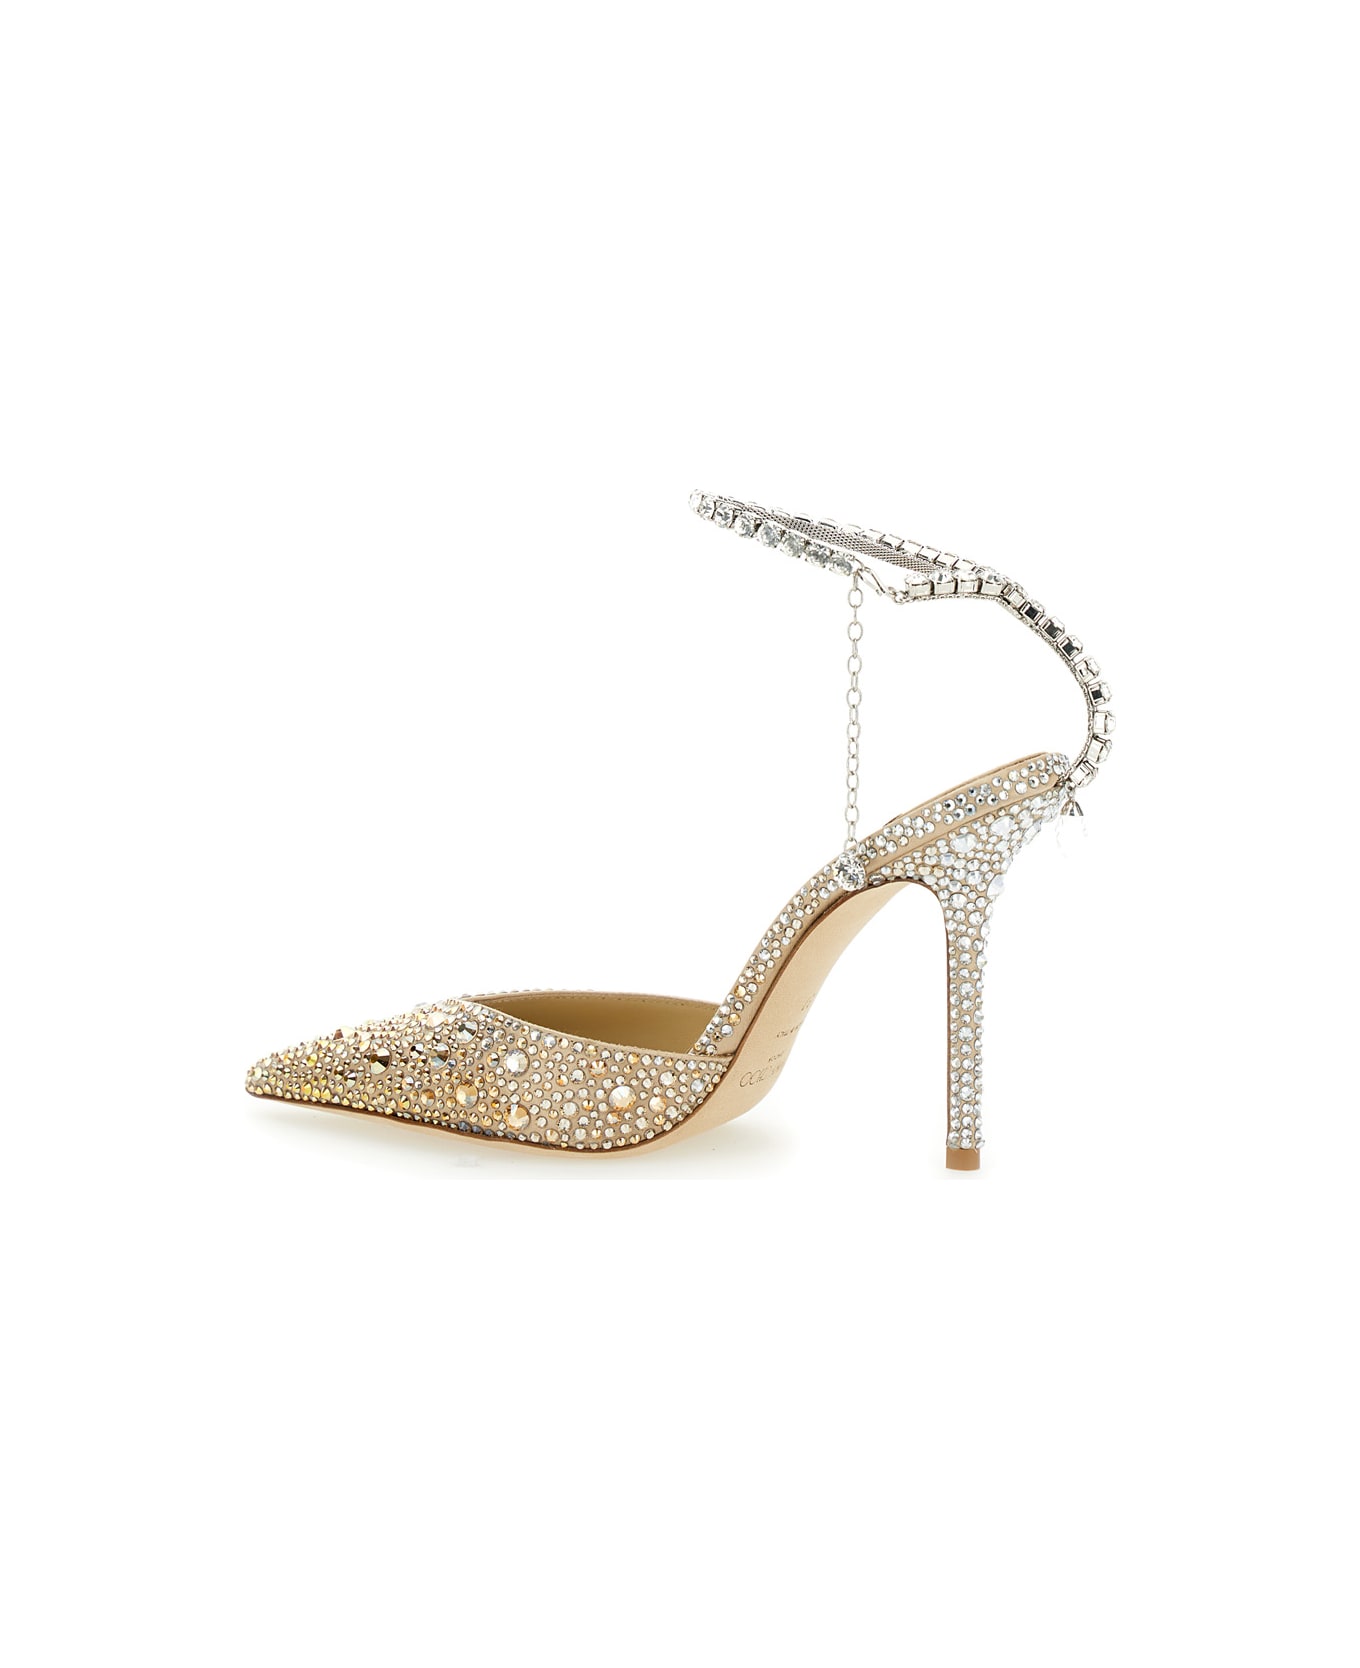 Jimmy Choo 'saeda 100' Gold Pumps With All-over Crystals In Satin Woman - Beige ハイヒール